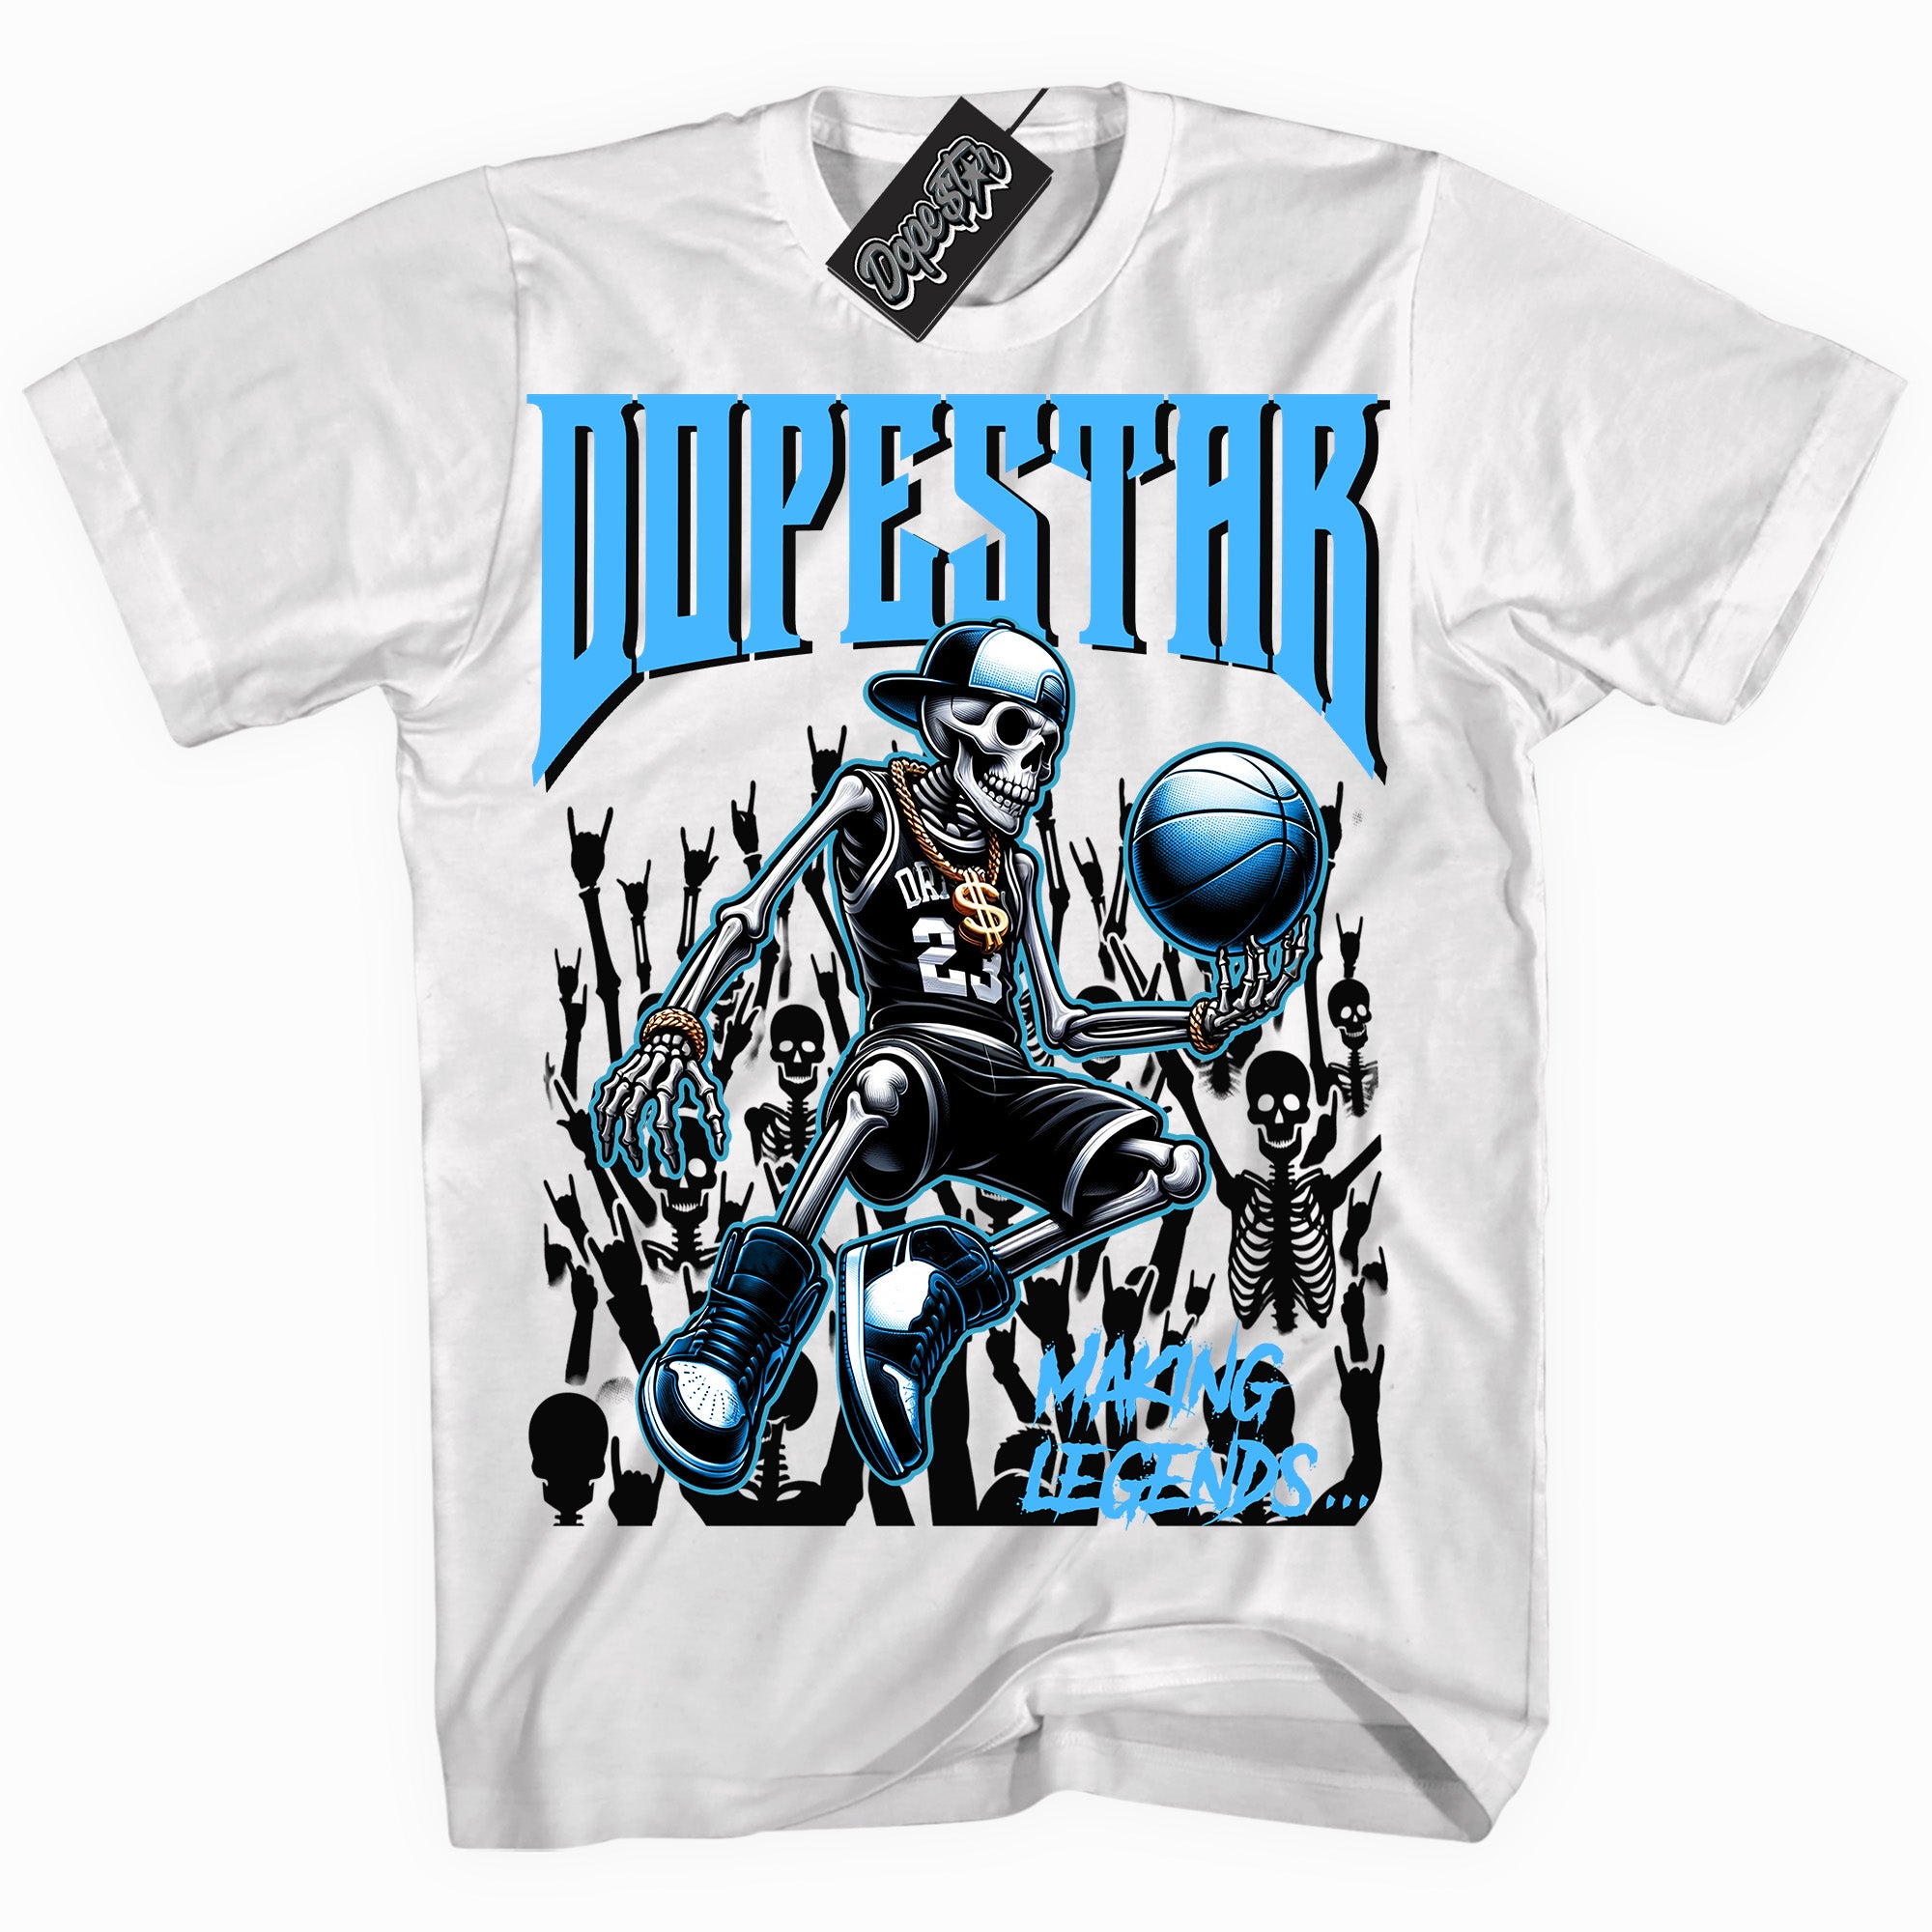 Cool White graphic tee with “ Making Legends ” design, that perfectly matches Powder Blue 9s sneakers